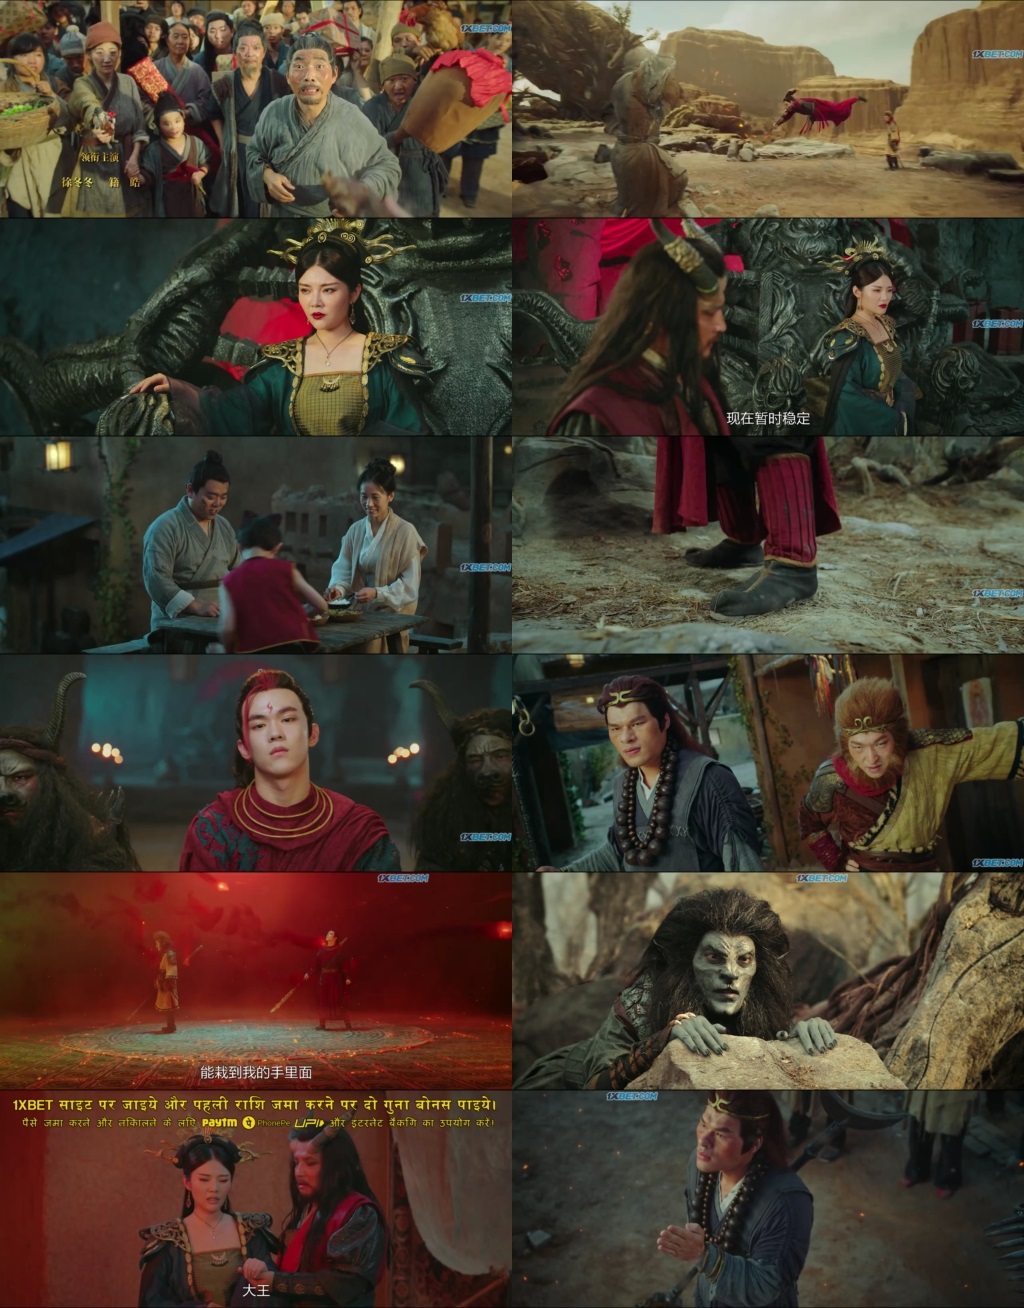 journey to the west movie hindi